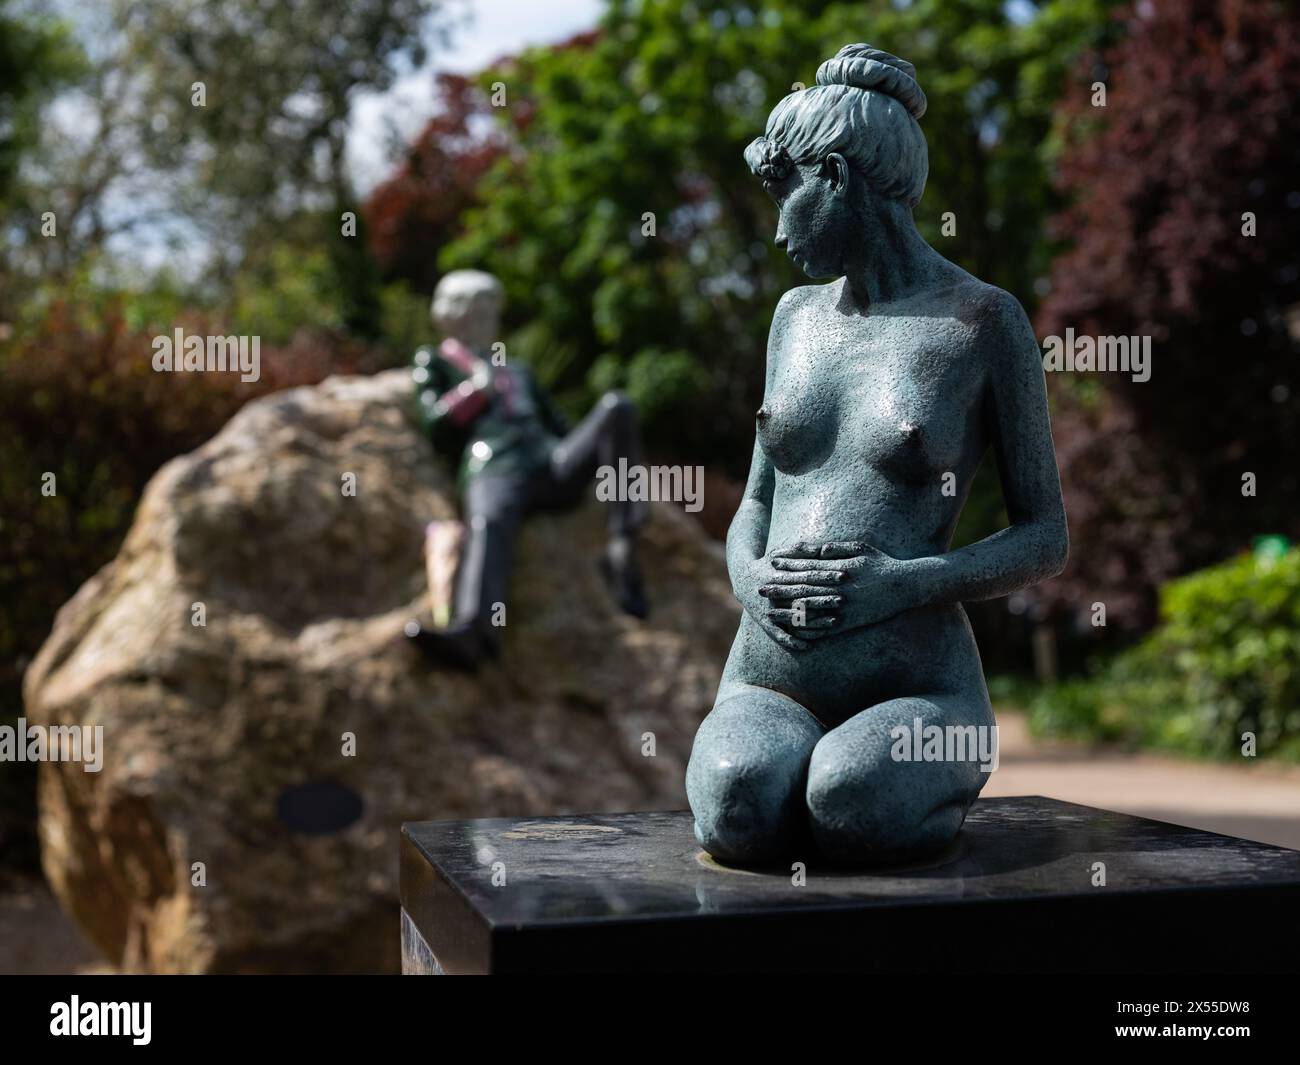 Sculptures dedicated to the legacy of Oscar Wilde in Merrion Square, Dublin city, Ireland. Stock Photo